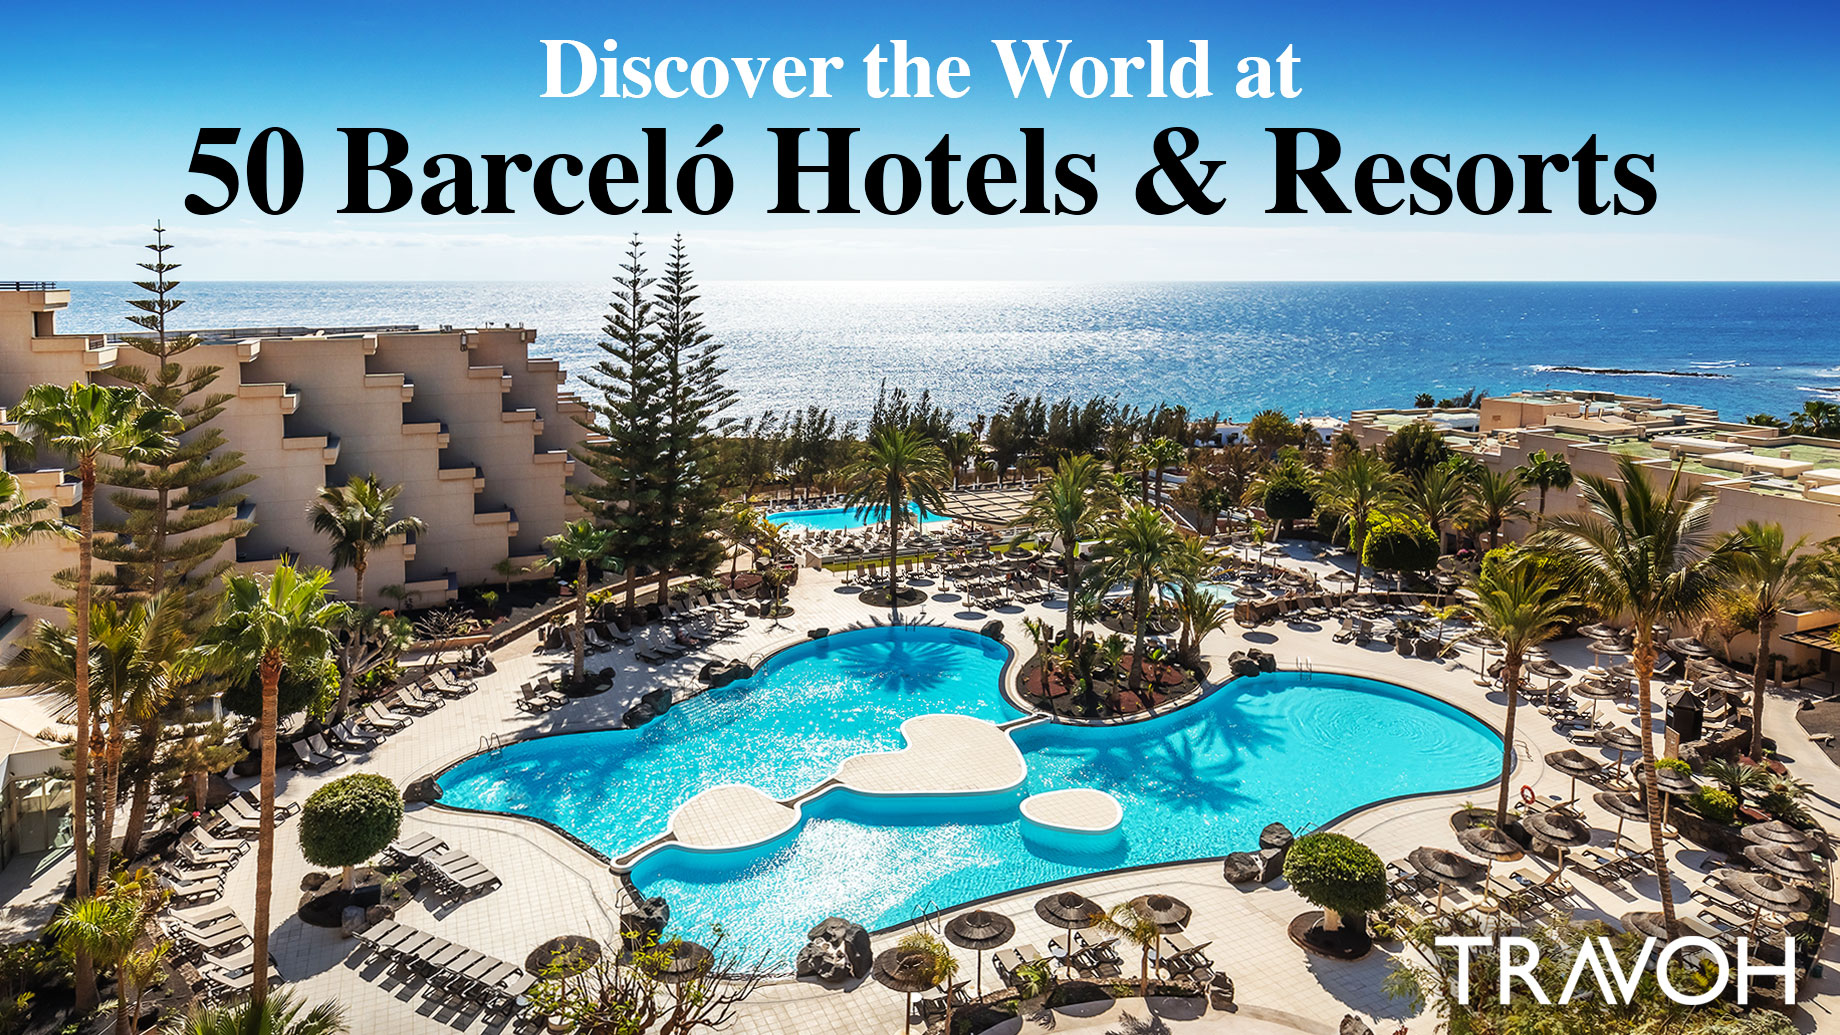 Discover the World at 50 Barceló Hotels & Resorts